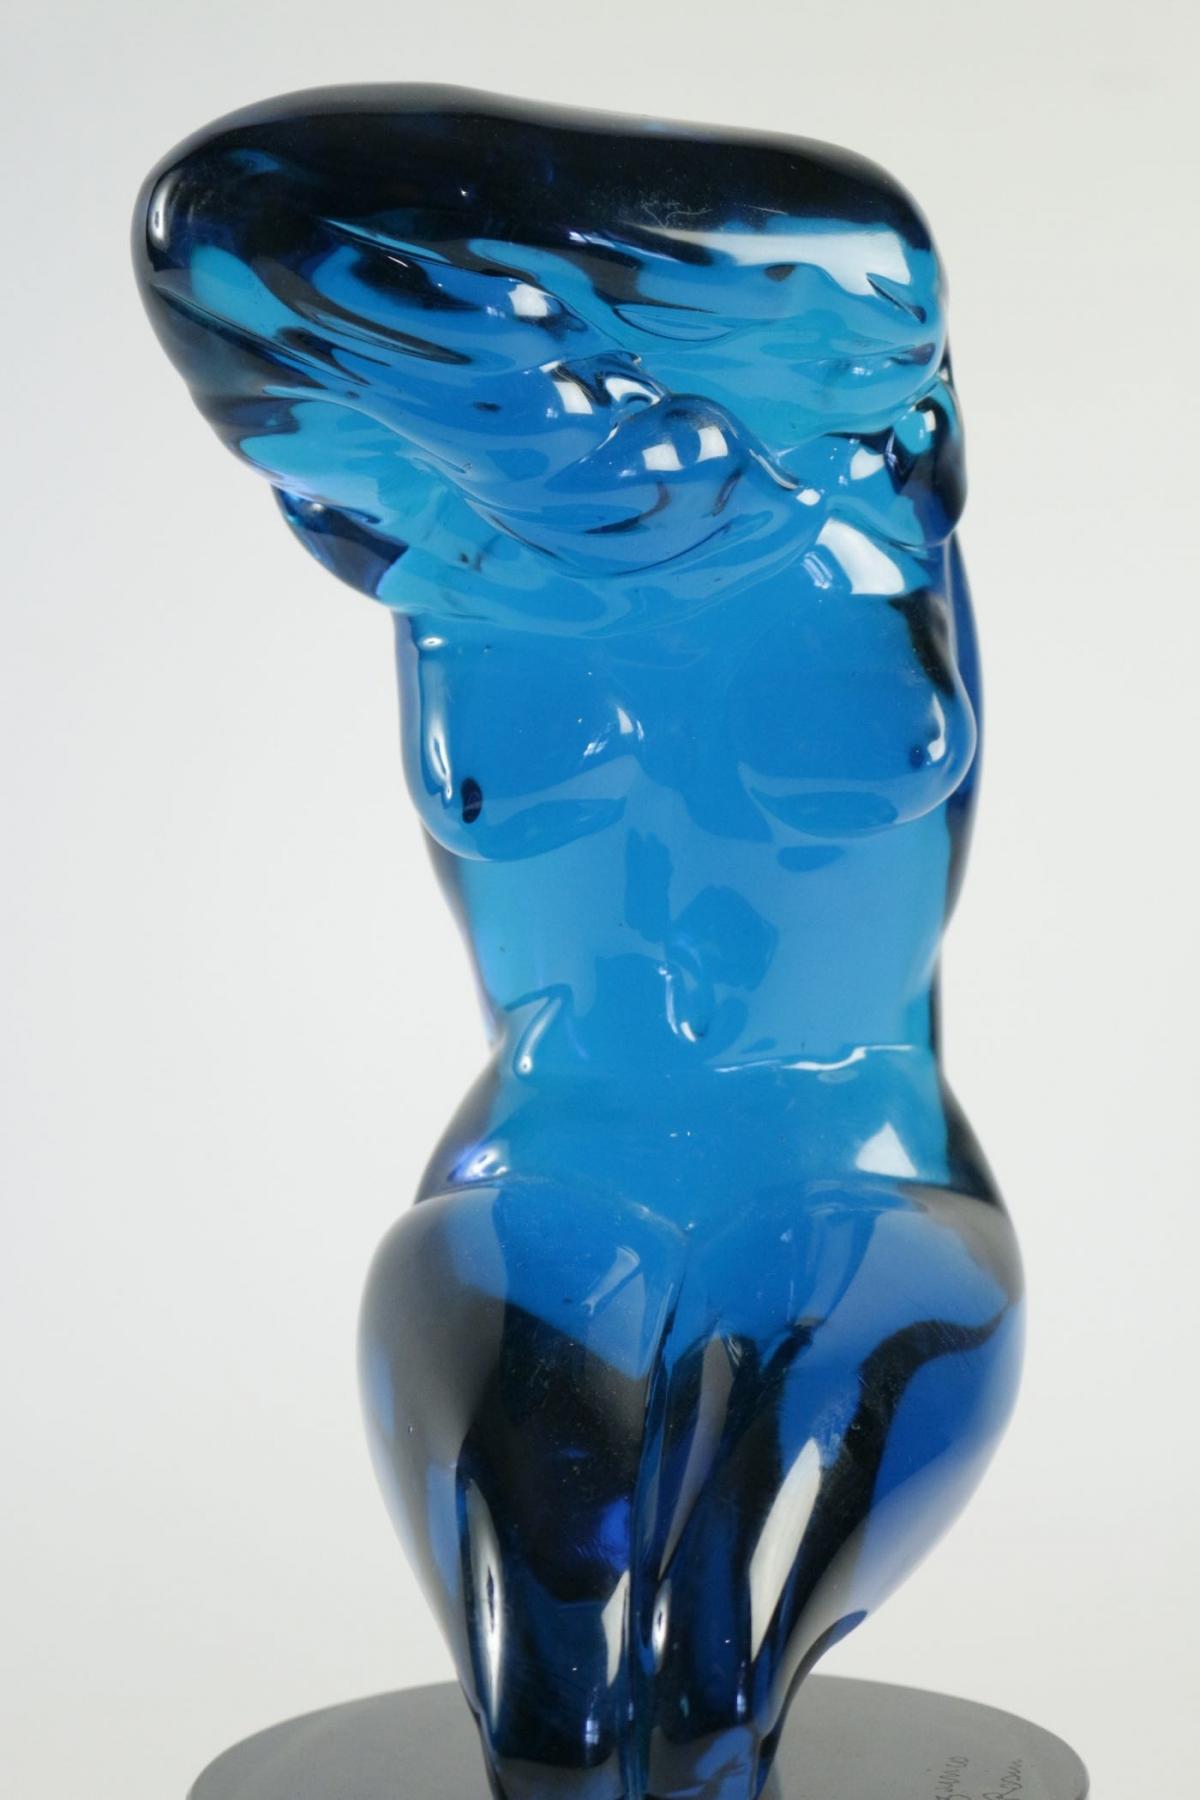 Important statue of L.rosin, Italy, Murano glass of blue color, signed and dated under the pedestal: Murano 25-10-1978
Measures:H: 39cm, D: 18cm.